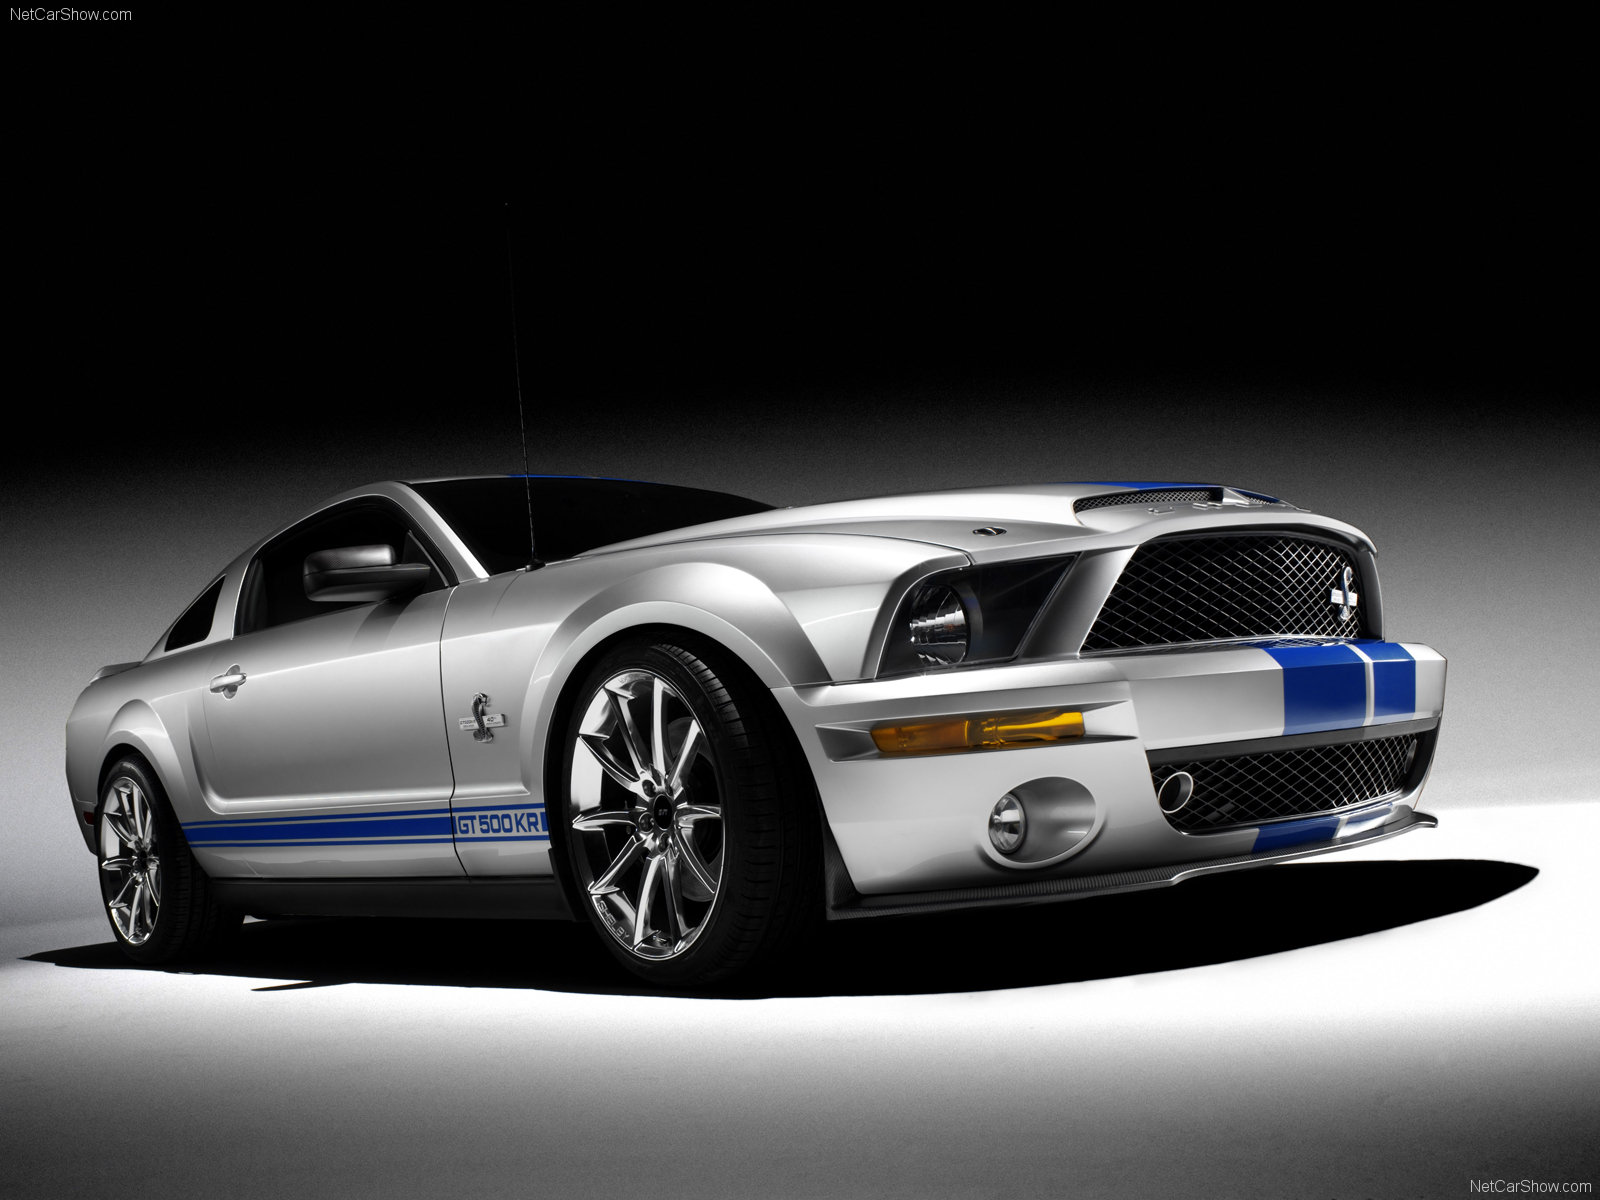 Ford Mustang Shelby GT500KR photo 42701